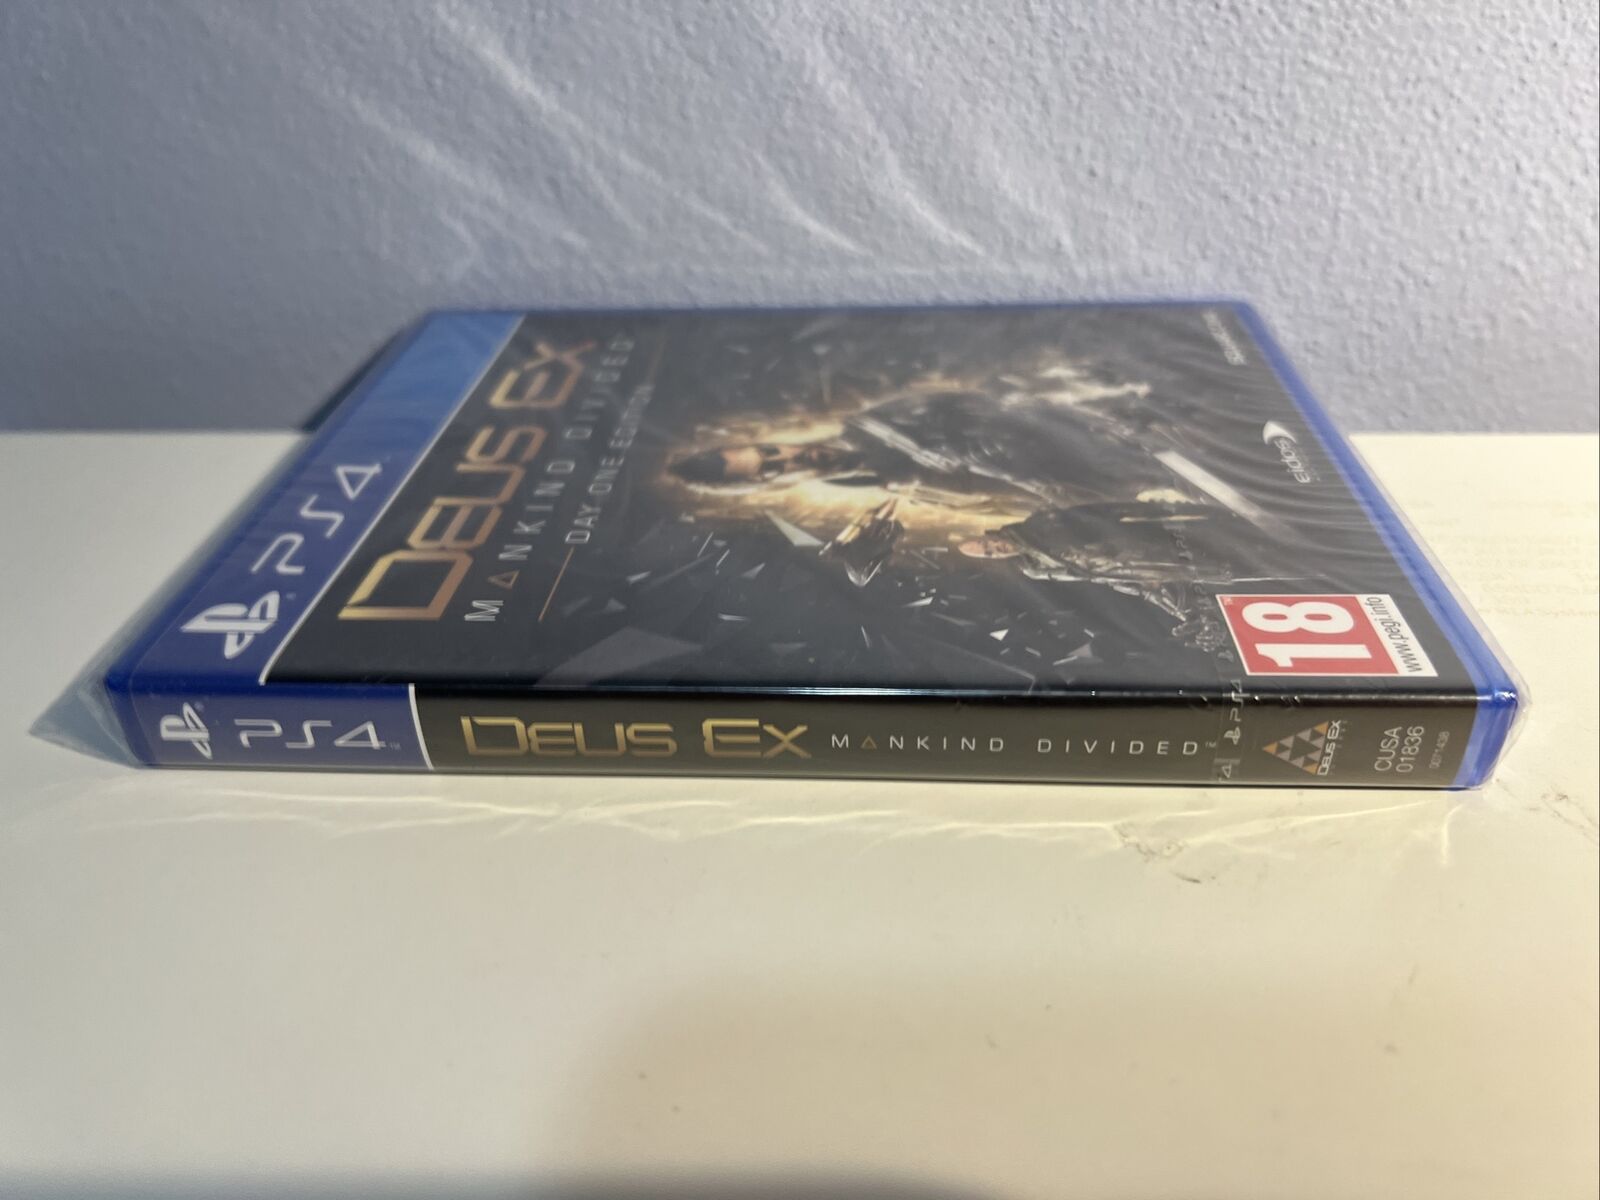 Playstation-4-Ps4-Videogioco-Deus-Ex-Mankinf-Devided-Day-One-Edition-Pal-133930697572-2